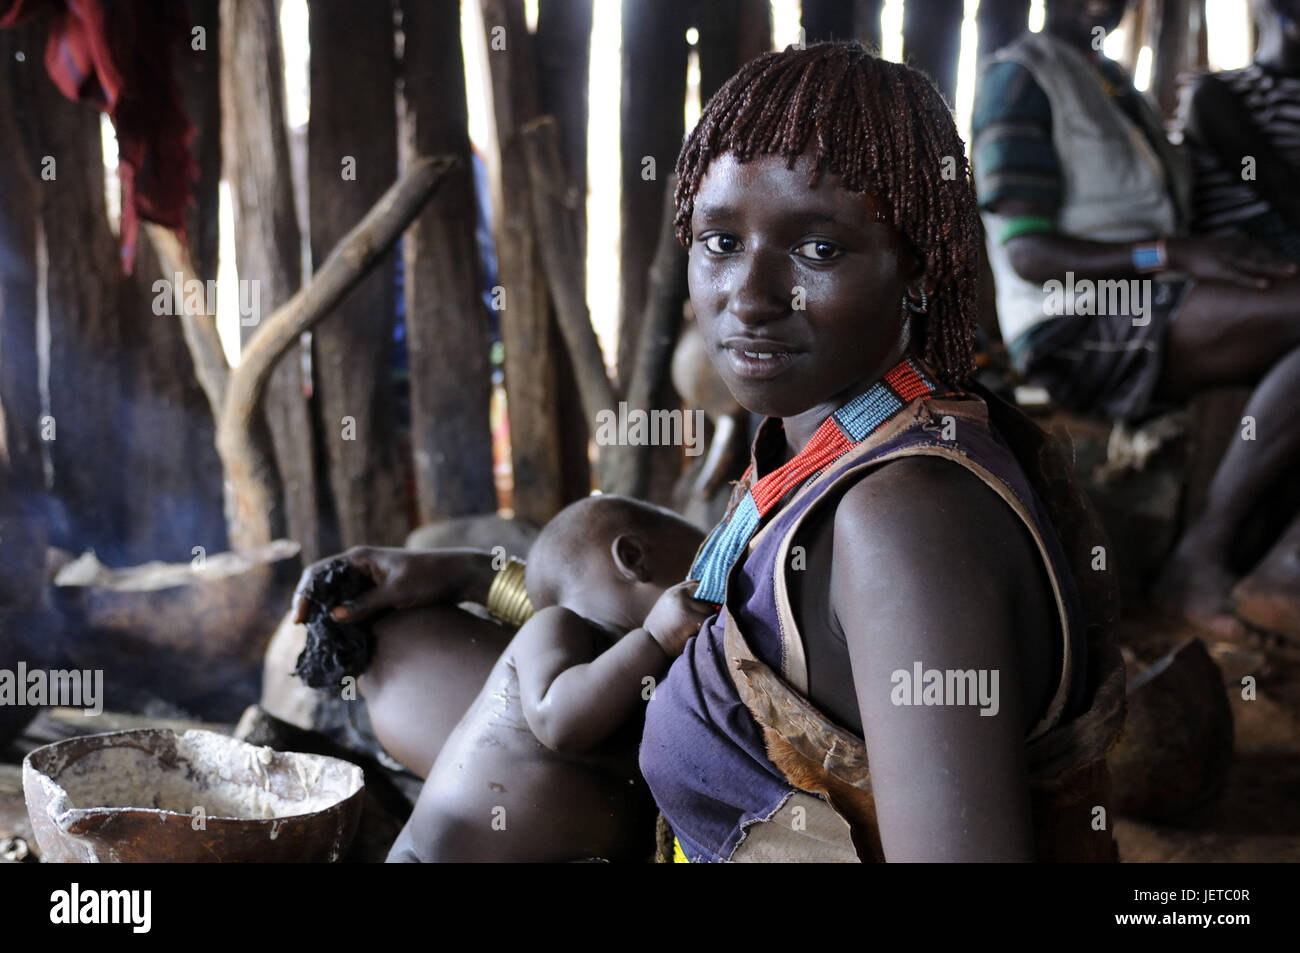 Woman, young, baby, tribe Hamar, steelworks, southern Omotal, Ethiopia, Stock Photo